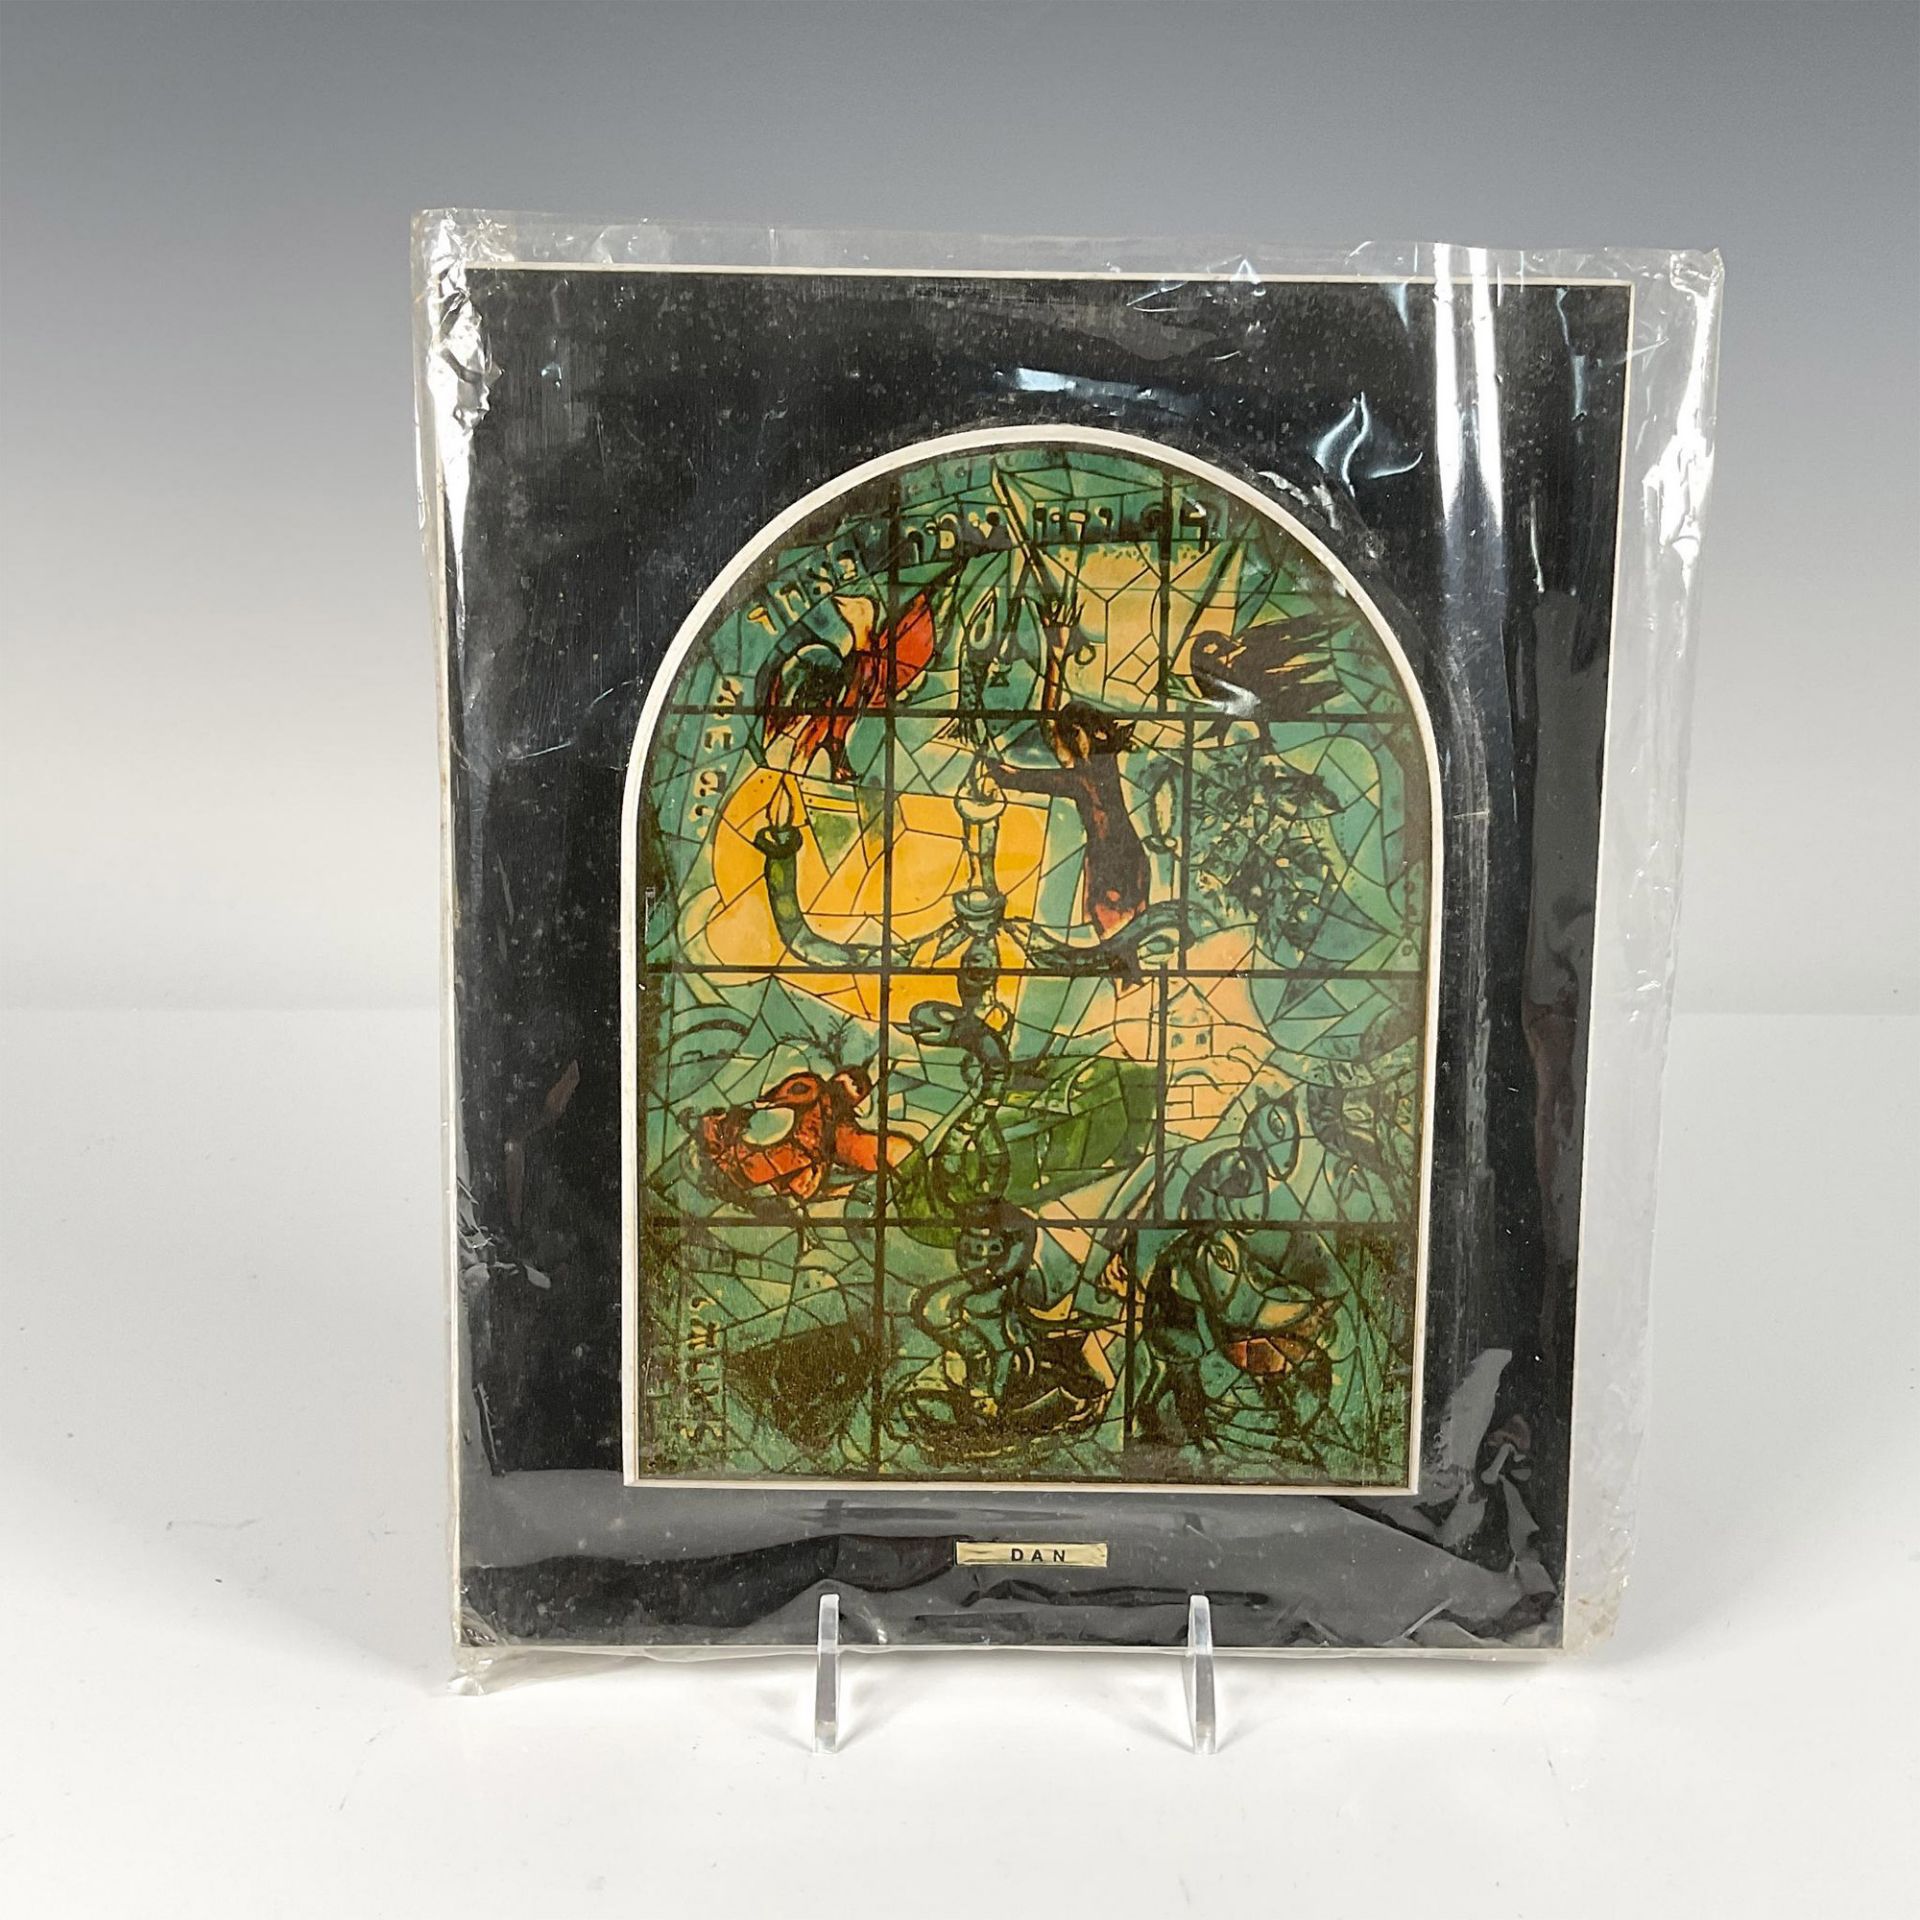 13pc After Marc Chagall by Avissar Wooden Plaques, The 12 Stained Glass Windows - Bild 15 aus 20